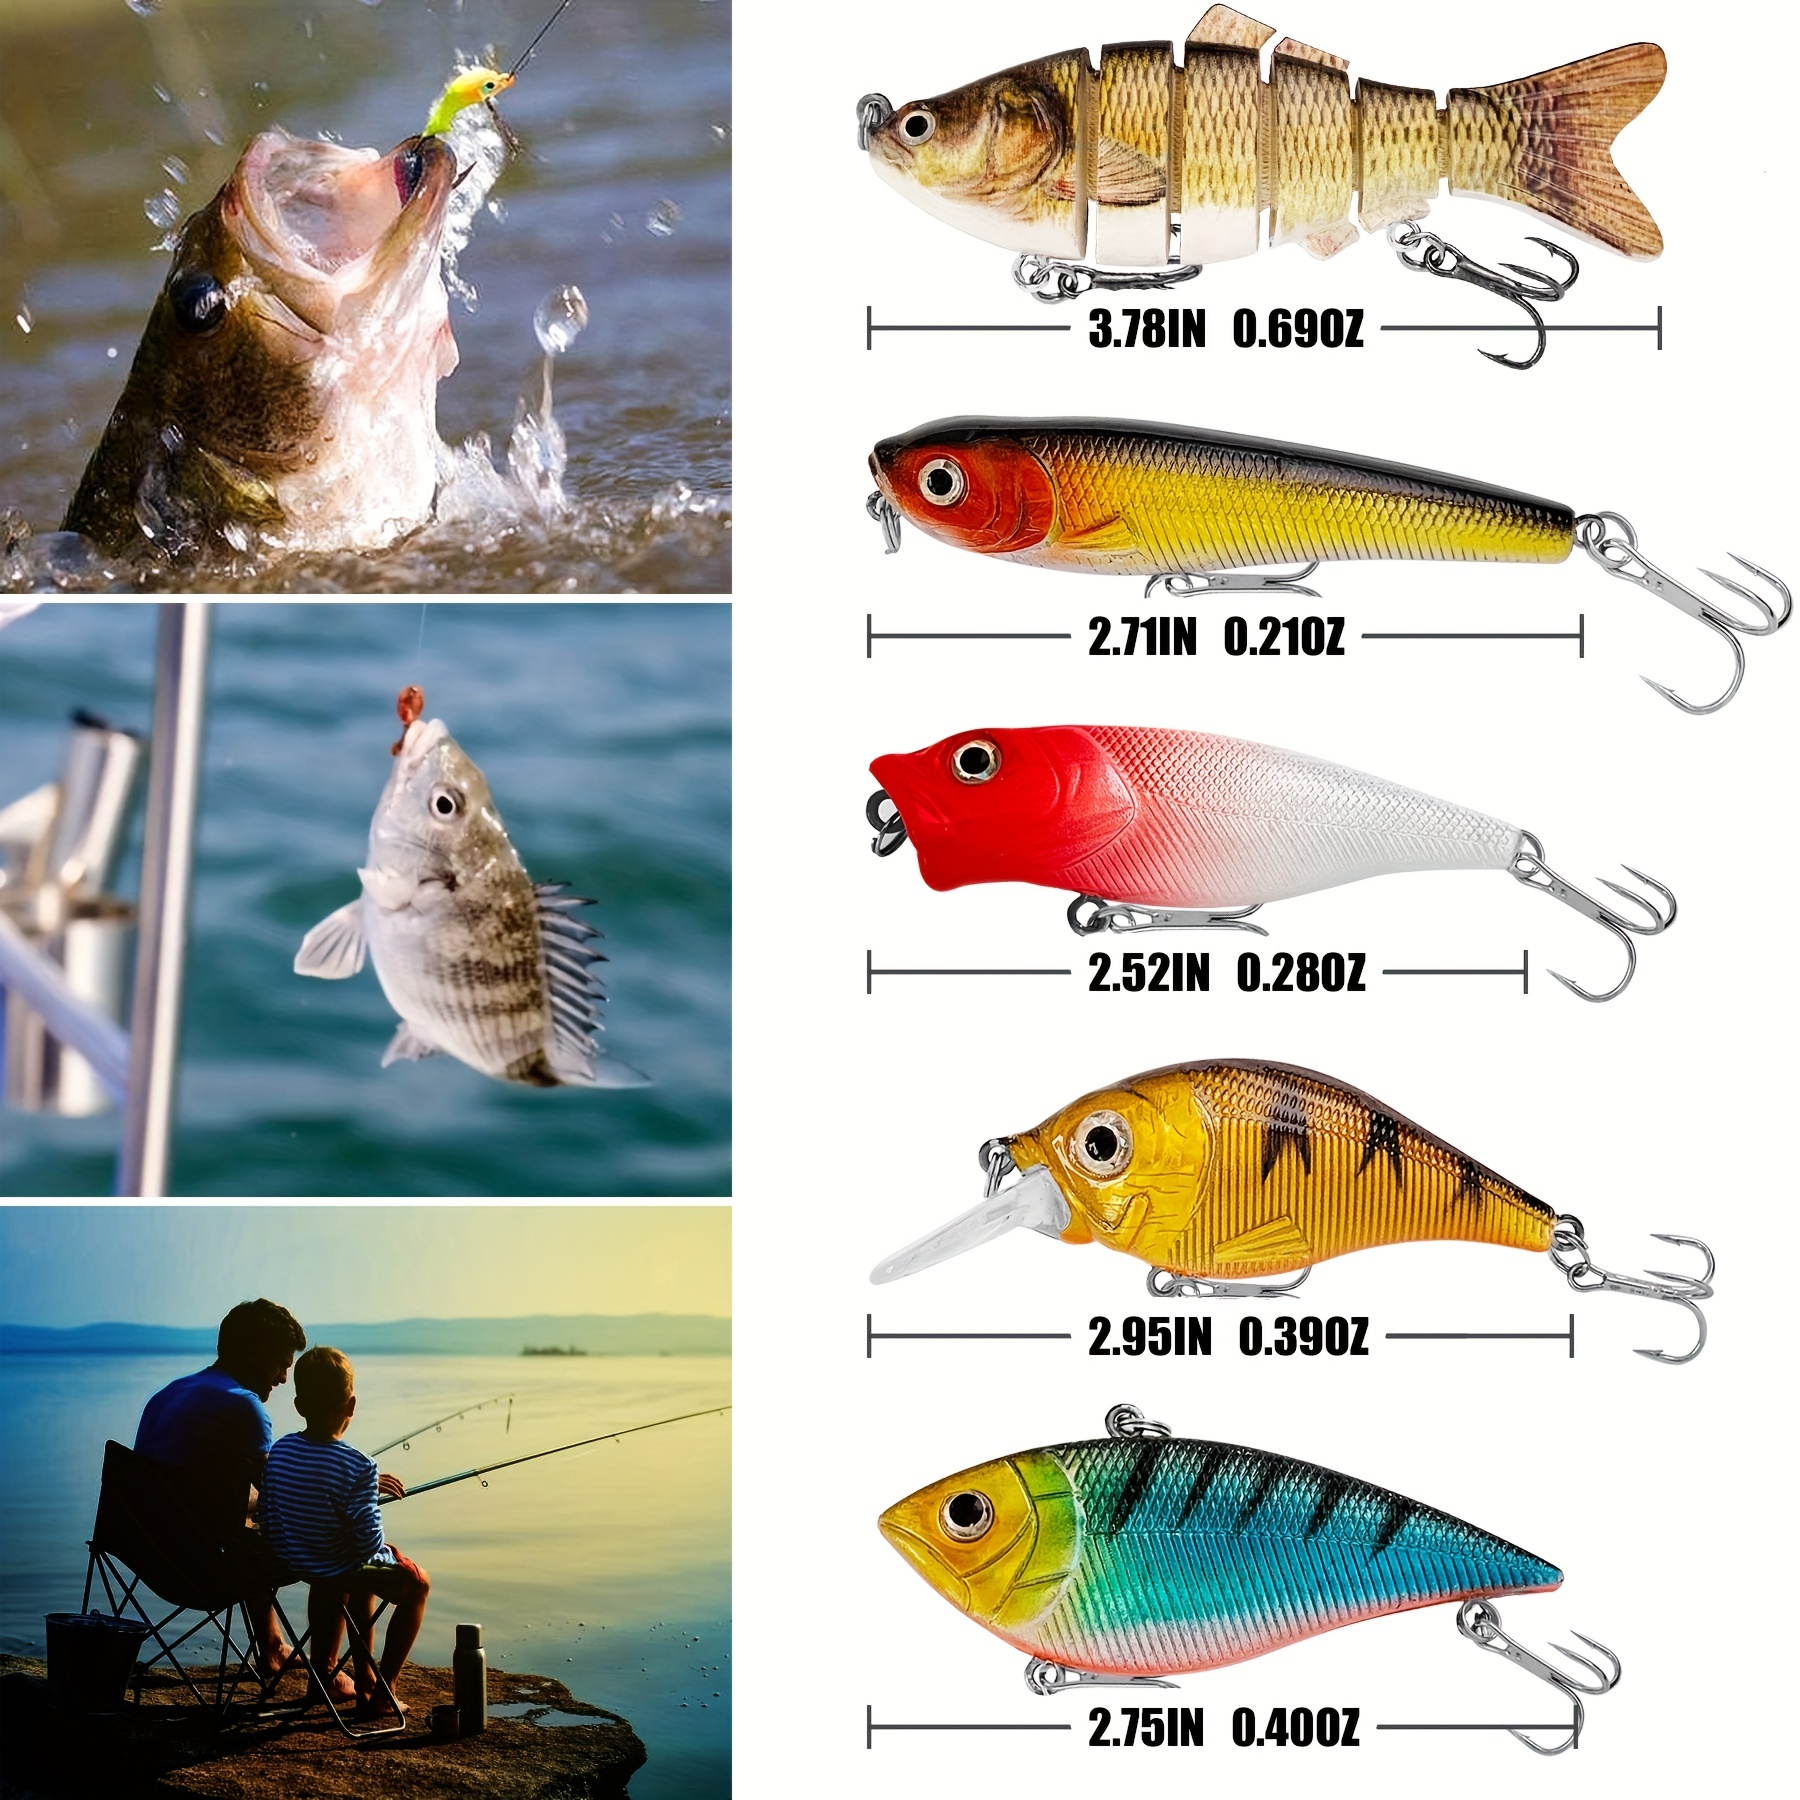  275PCS Fishing Lures Set Including Crankbaits Spinnerbaits Plastic  Worms Jigs Topwater Lures Hook for Trout Bass Salmon : Sports & Outdoors